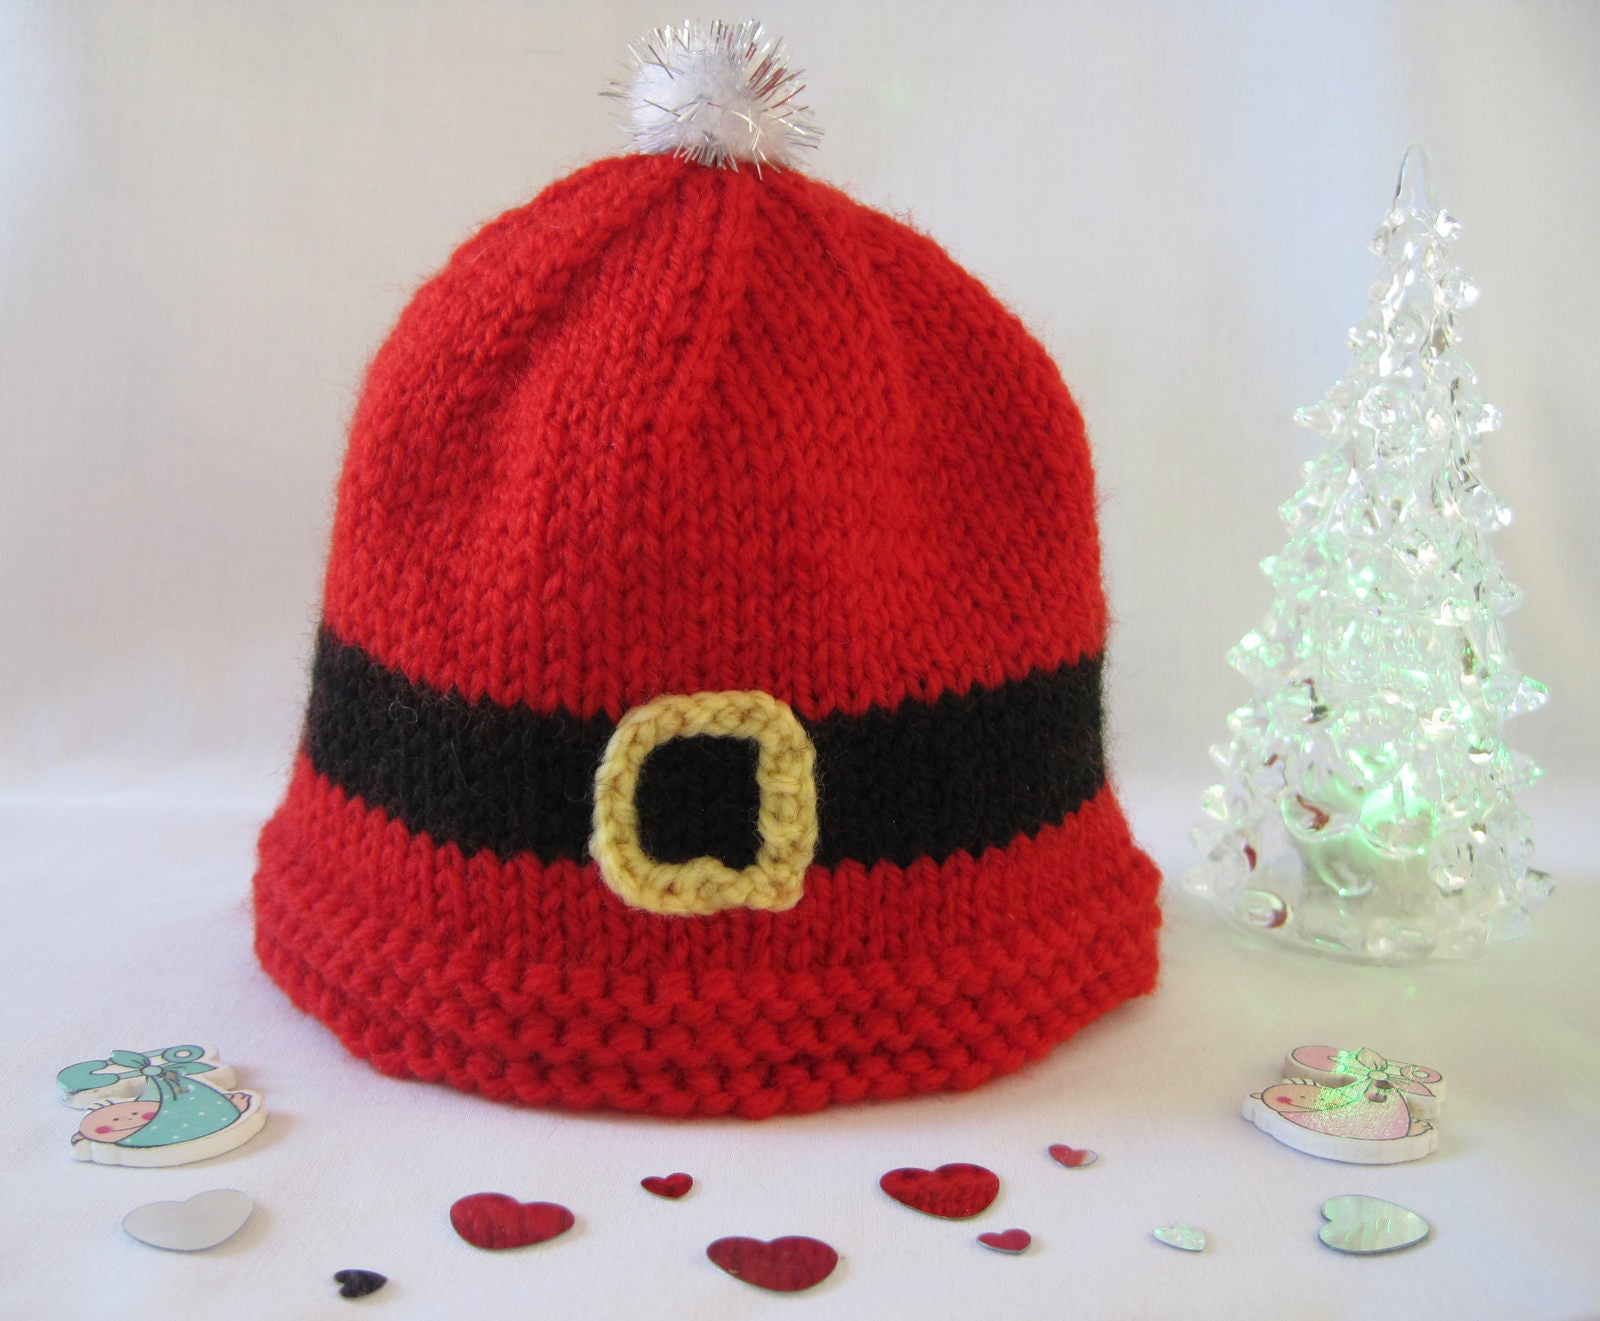 Baby Beanie Hat Knitting Pattern Xmas Ba Beanie Hat Knitting Pattern New Born Xmas Beanie Pattern Instant Download Ba Beanie Pattern Easy To Knit Ba Beanie Pattern